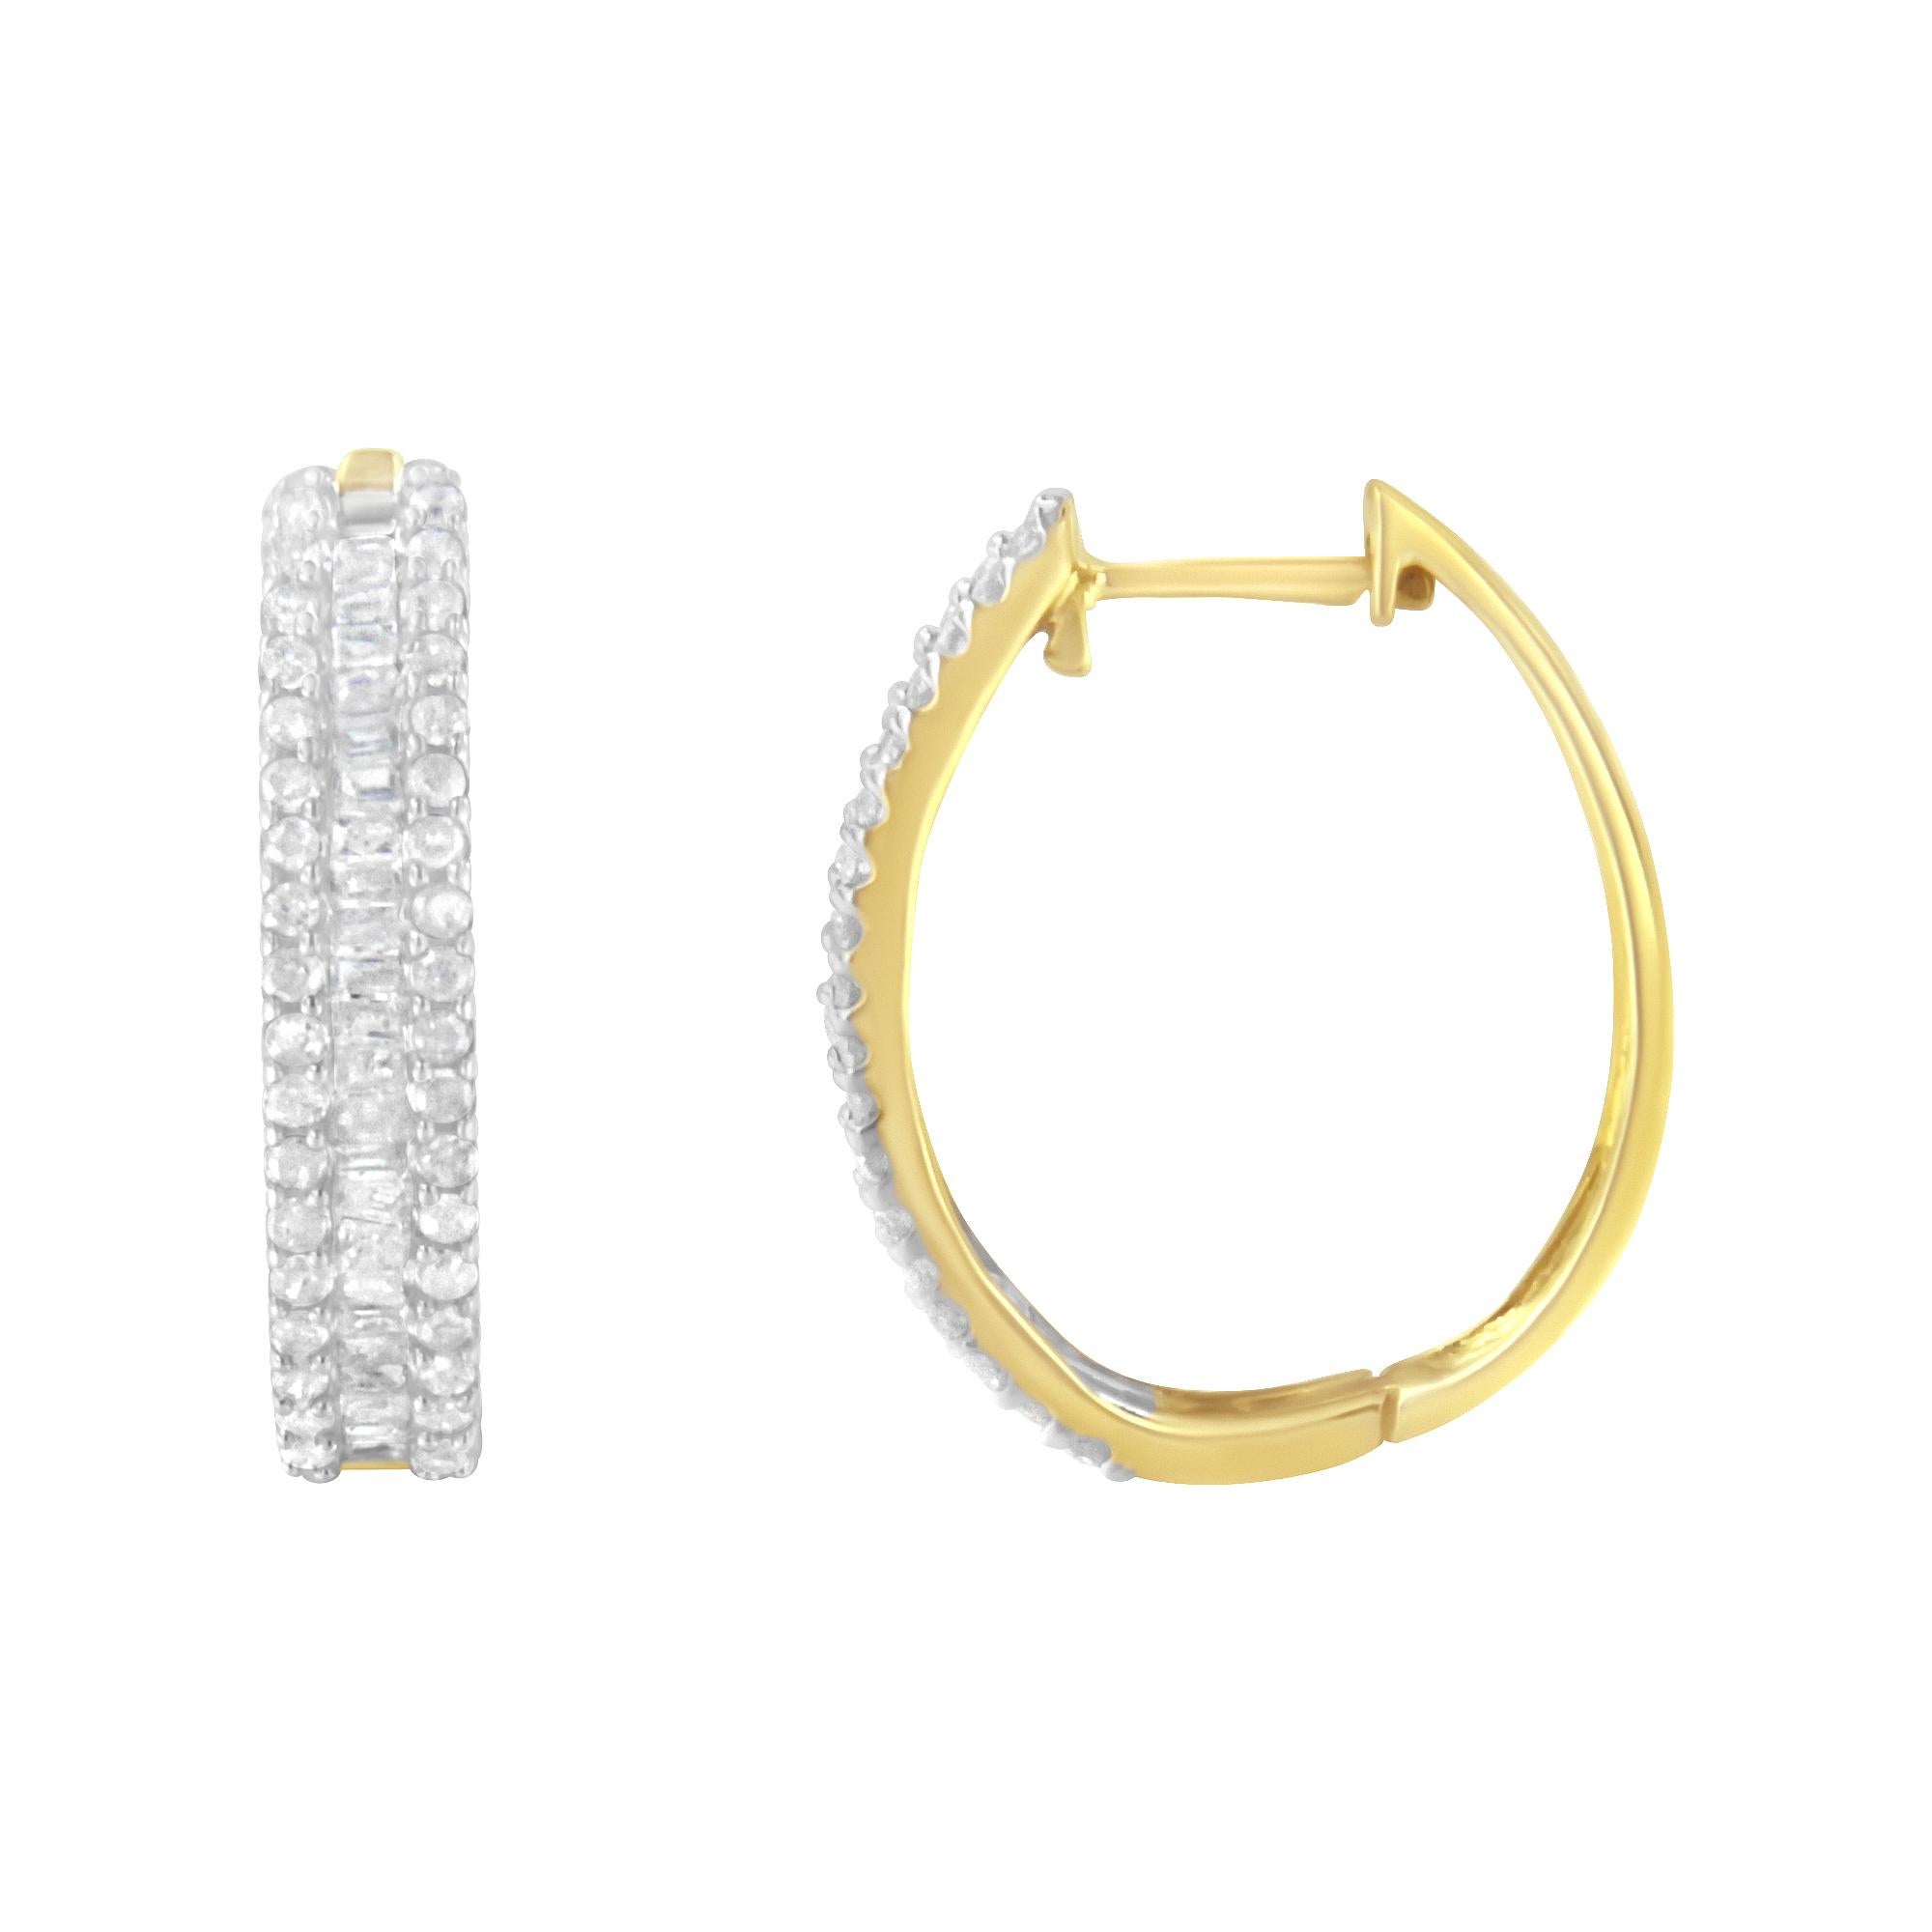 Magnificent hoop earrings with a classic design that embraces 122 genuine diamonds and a total diamond weight of 3/4ct. Made with 10k yellow gold structure that encloses baguette-cut diamonds in a channel setting  in the middle. The outer layers